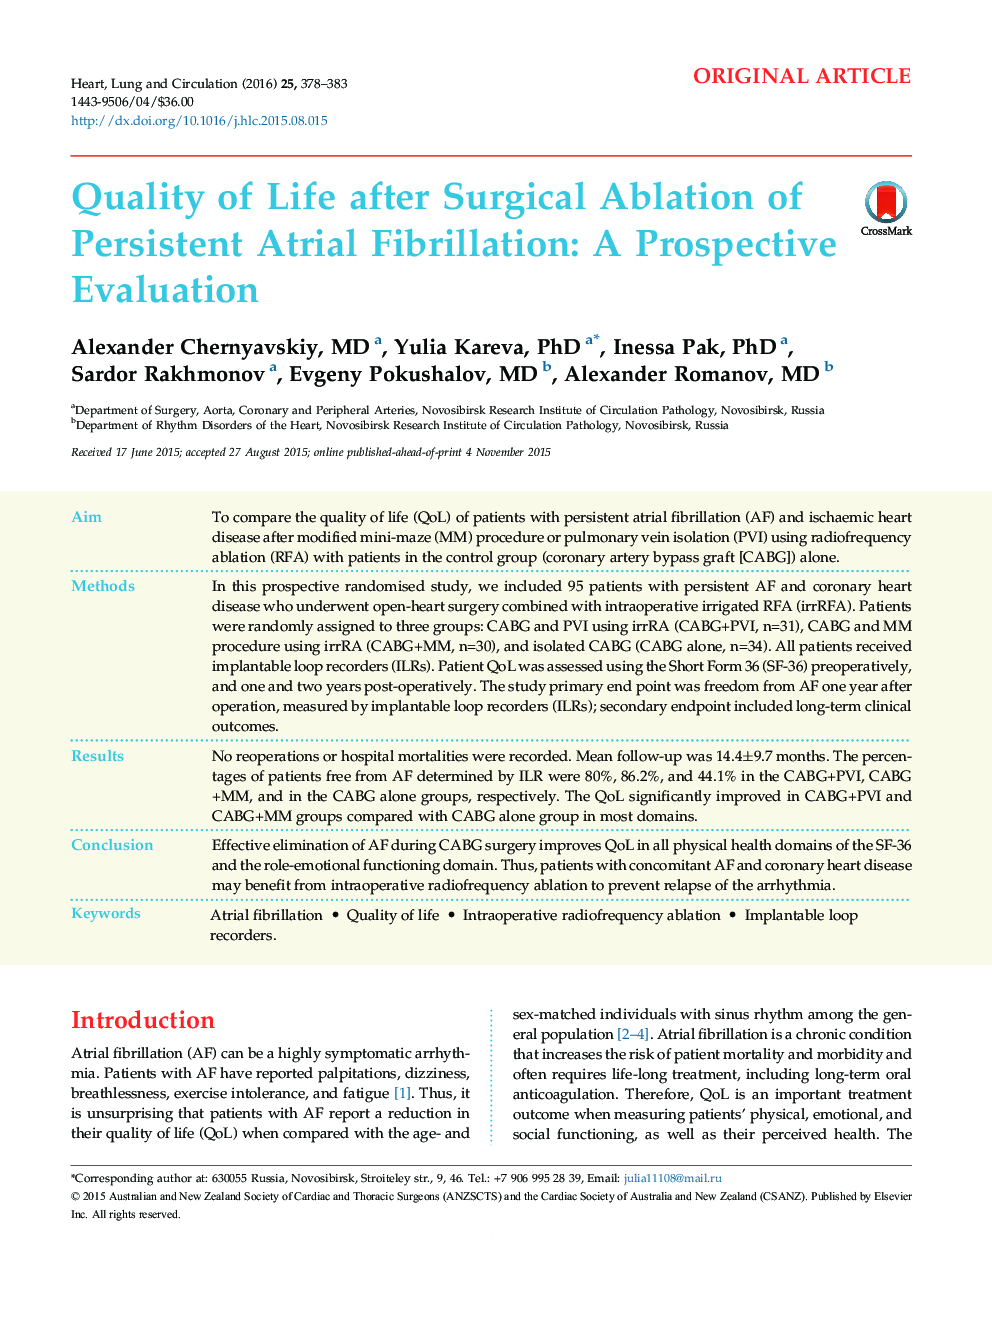 Quality of Life after Surgical Ablation of Persistent Atrial Fibrillation: A Prospective Evaluation